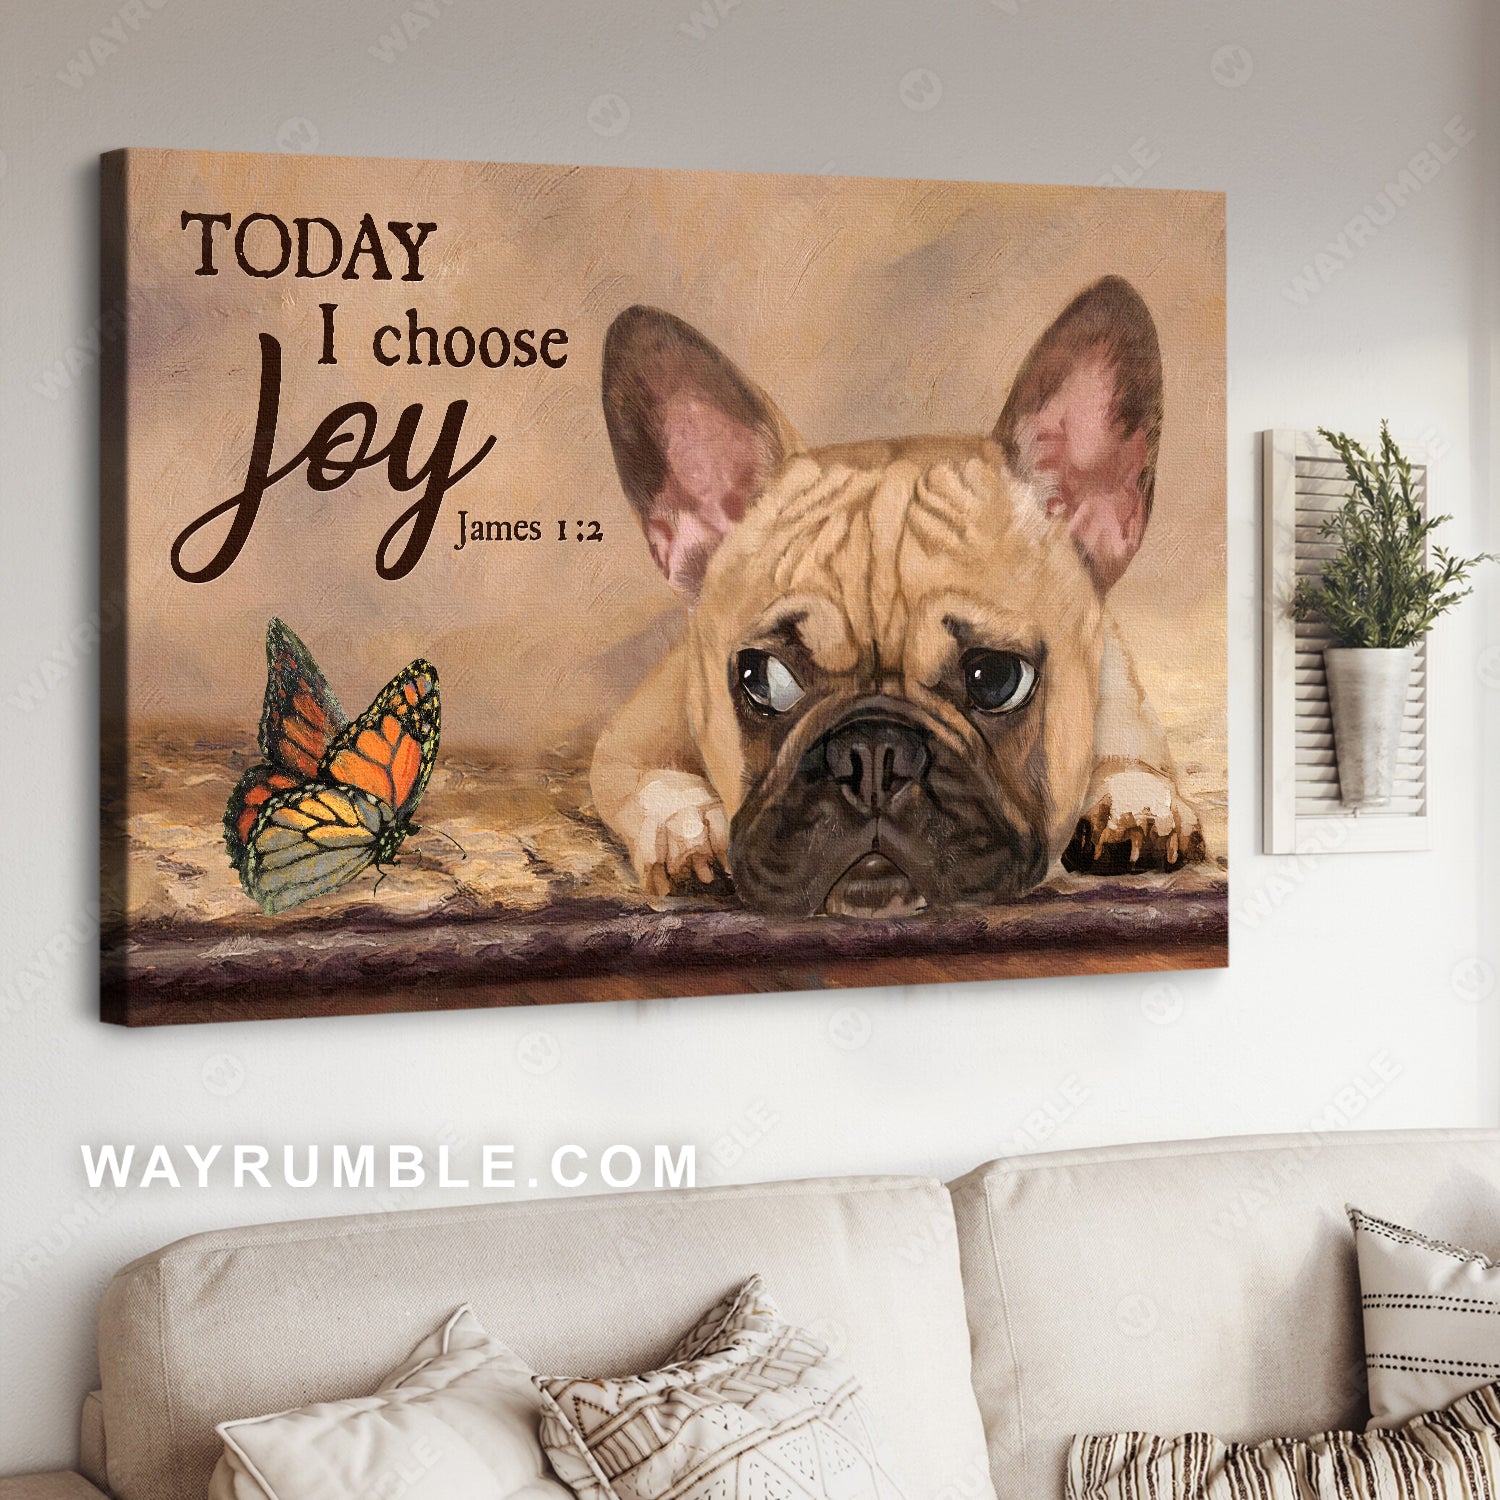 Little Bulldog, Monarch butterfly, Gift for dog lover, Today I choose joy - Jesus Landscape Canvas Prints, Home Decor Wall Art